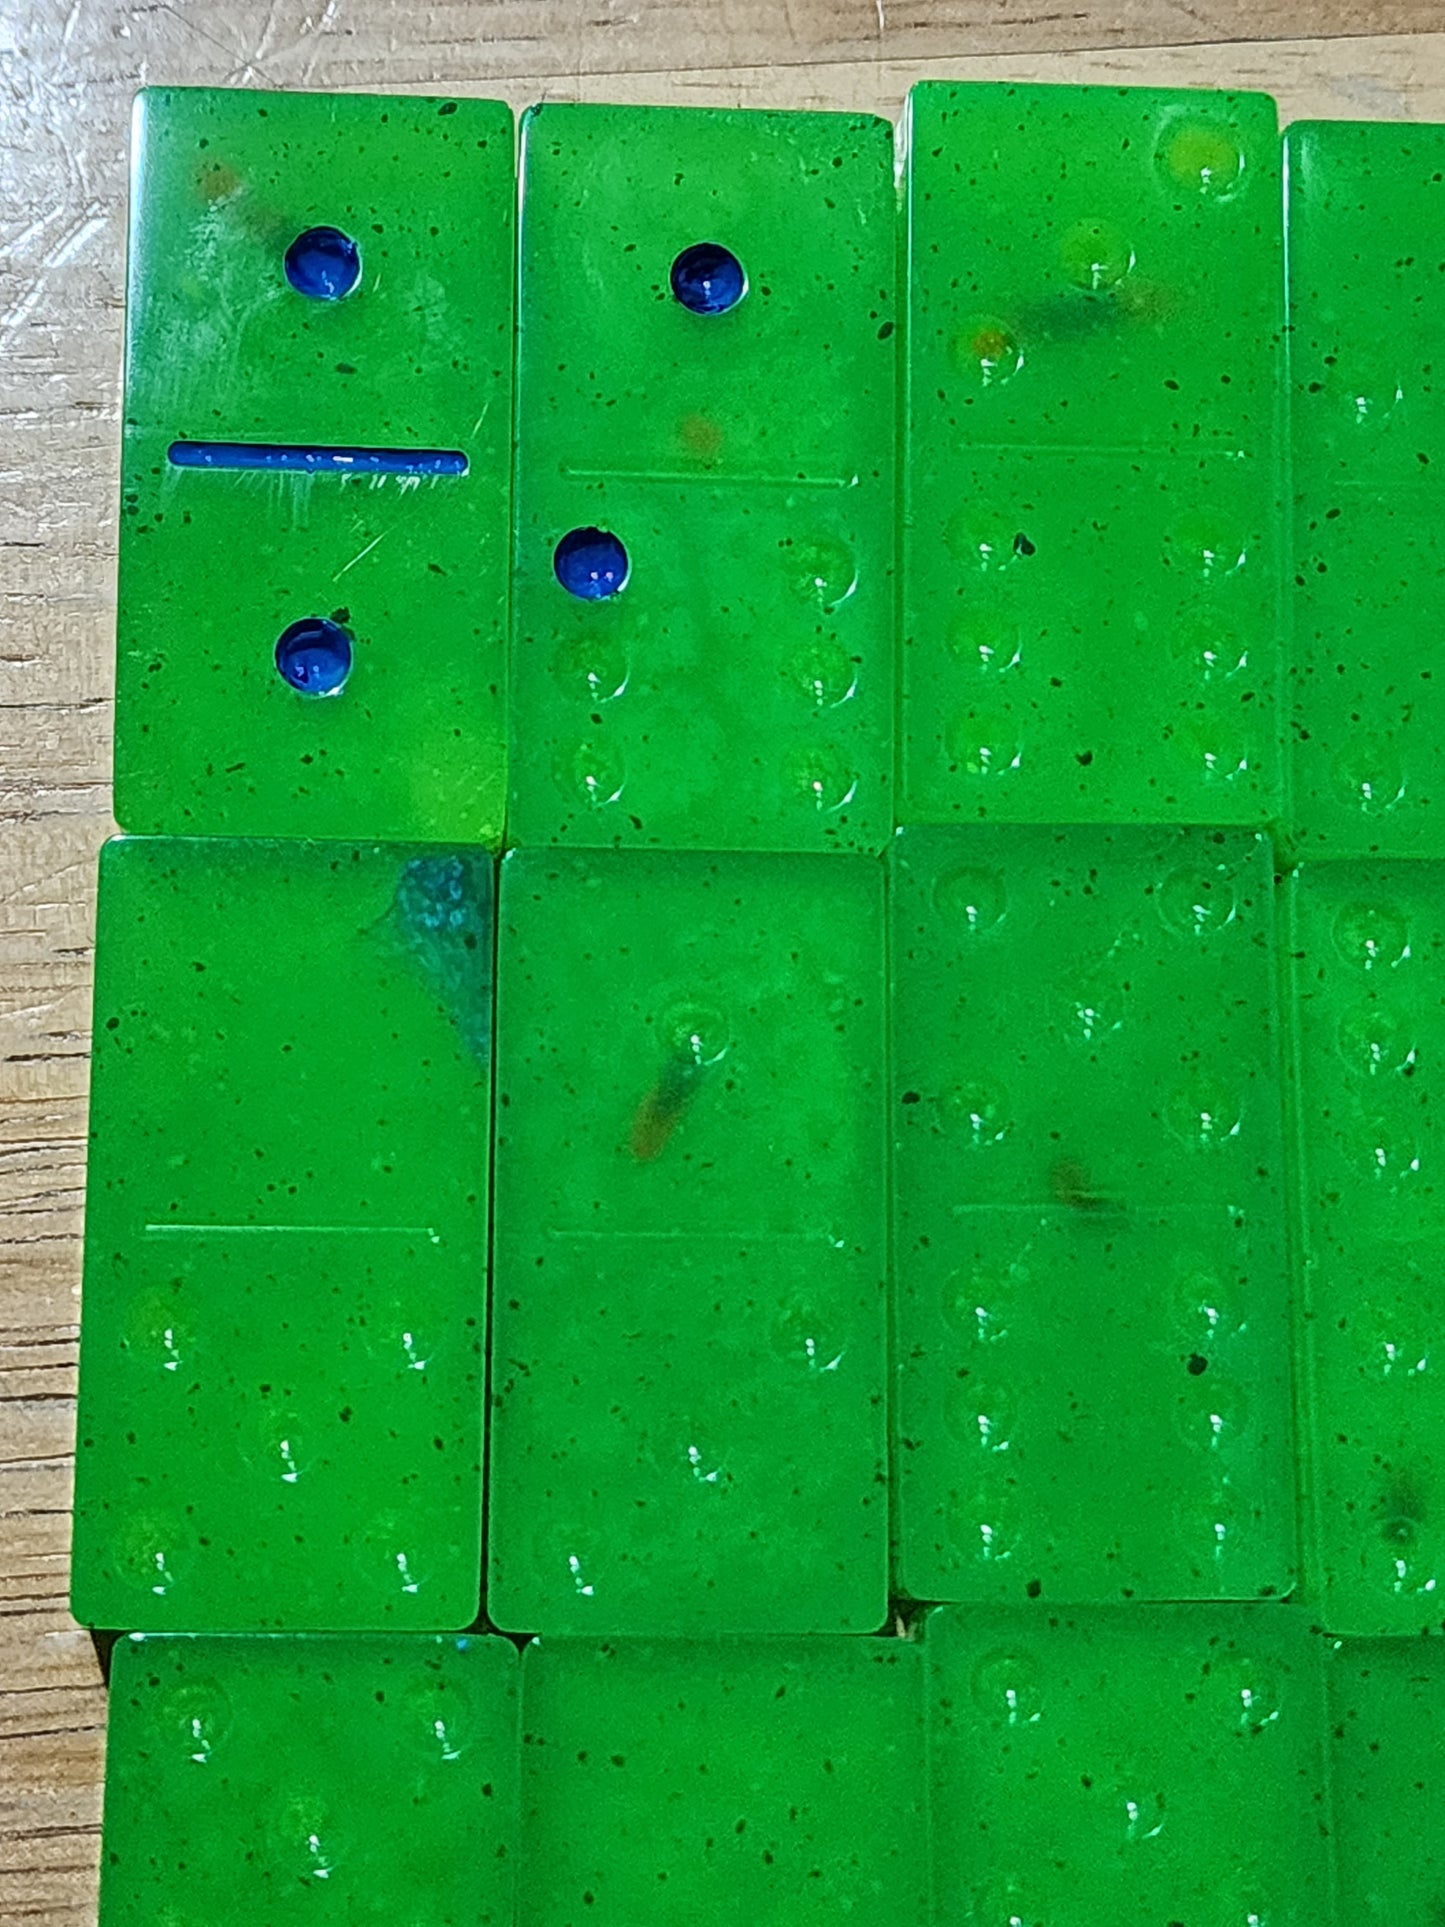 6X6 Dominos - Slime Green